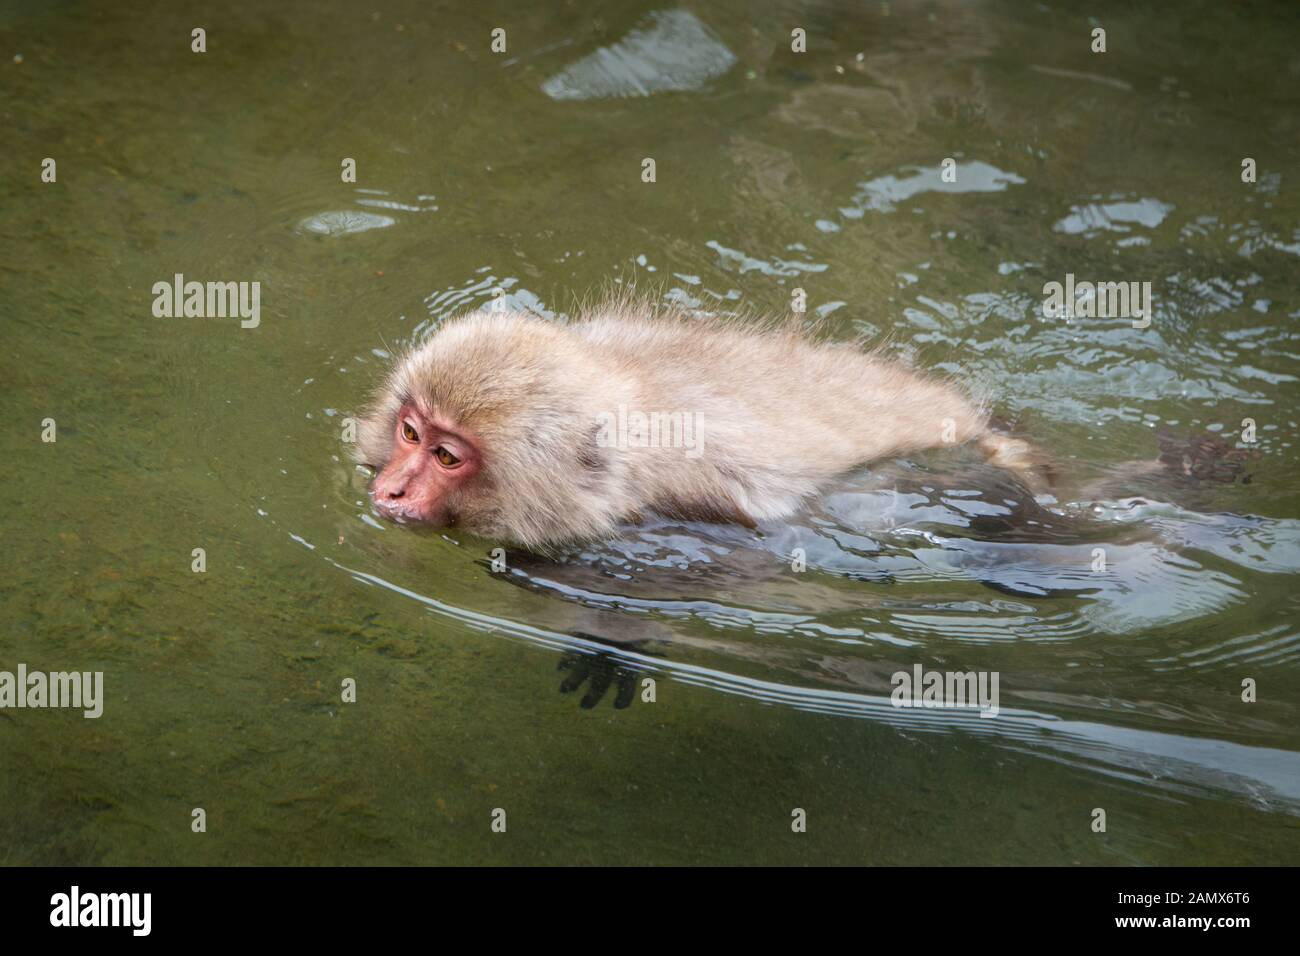 Japanese Macaque monkey swimming in the hot spring in the Jigokudani (means Hell Valley) snow monkey park in Nagano Japan Stock Photo